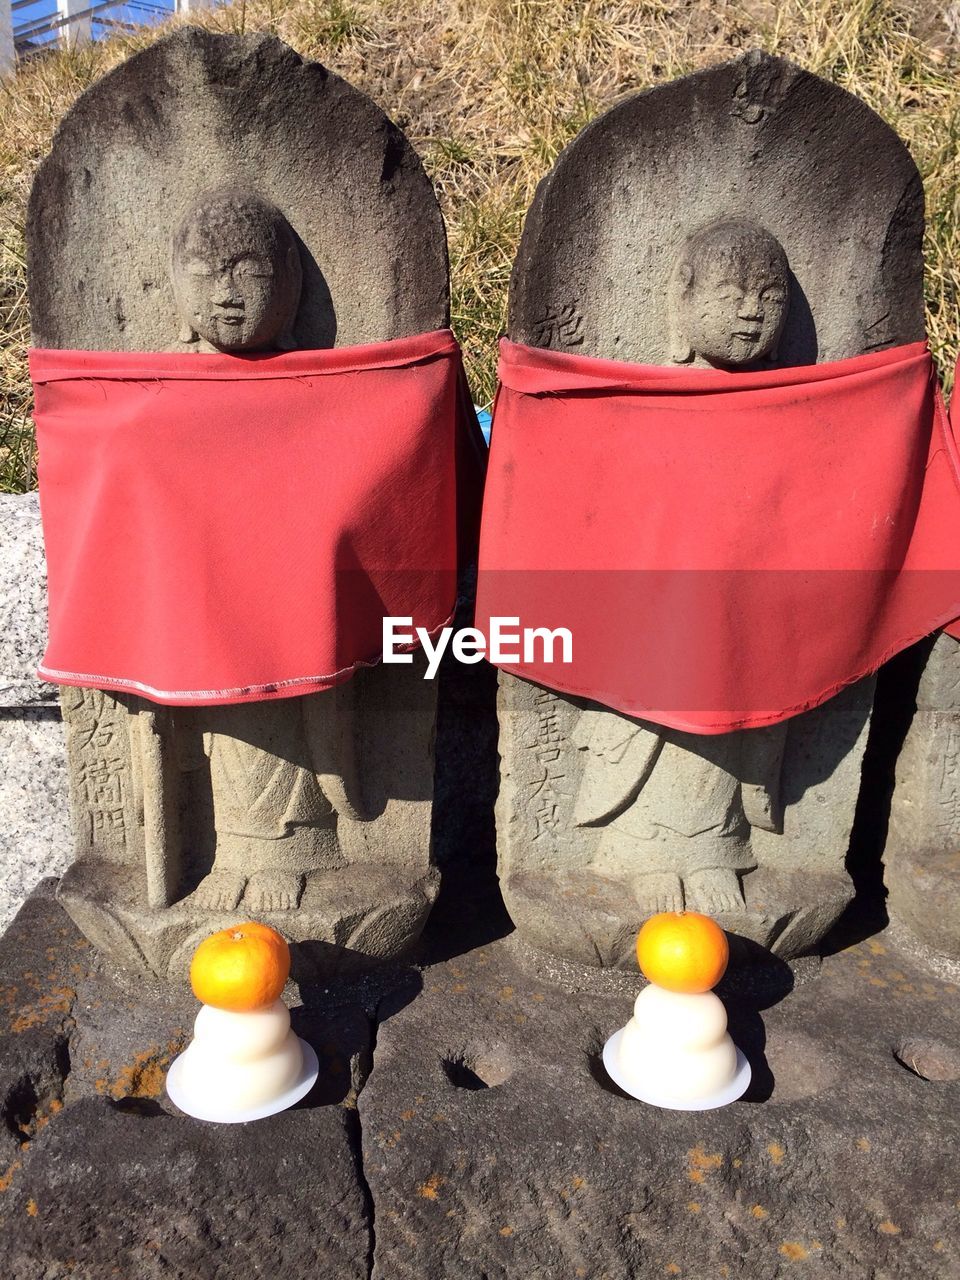 Jizo statues covered with red fabrics